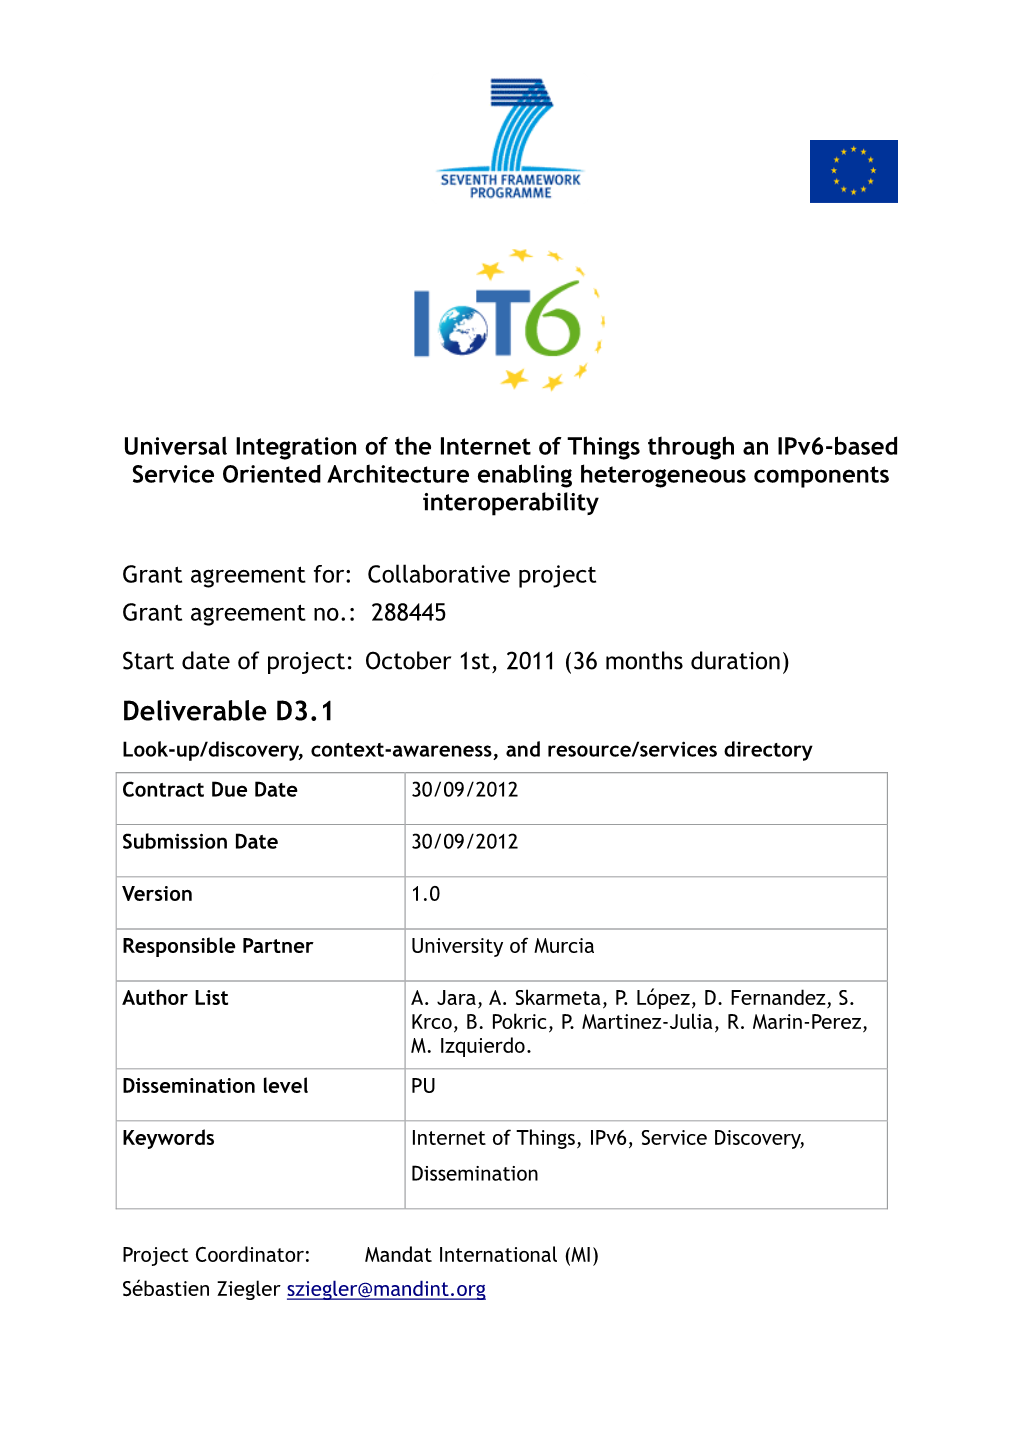 Deliverable D3.1 Look-Up/Discovery, Context-Awareness, and Resource/Services Directory Contract Due Date 30/09/2012